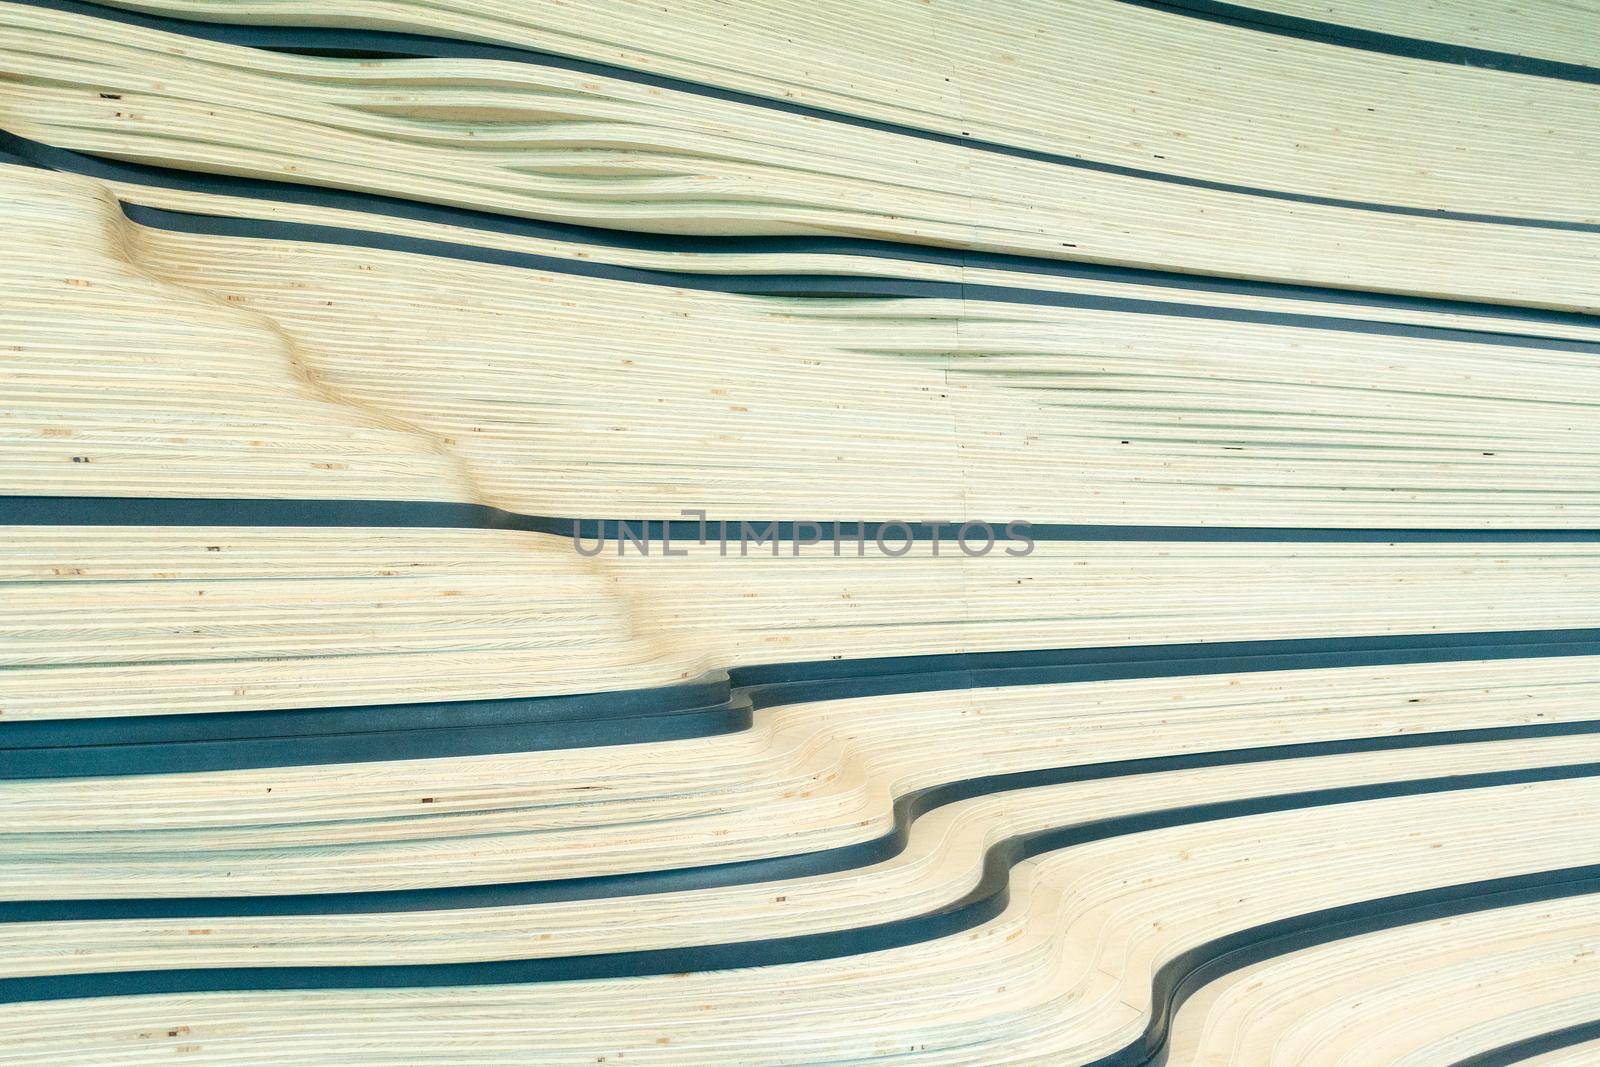 Wall structure of wood with wave pattern in horizontal lines